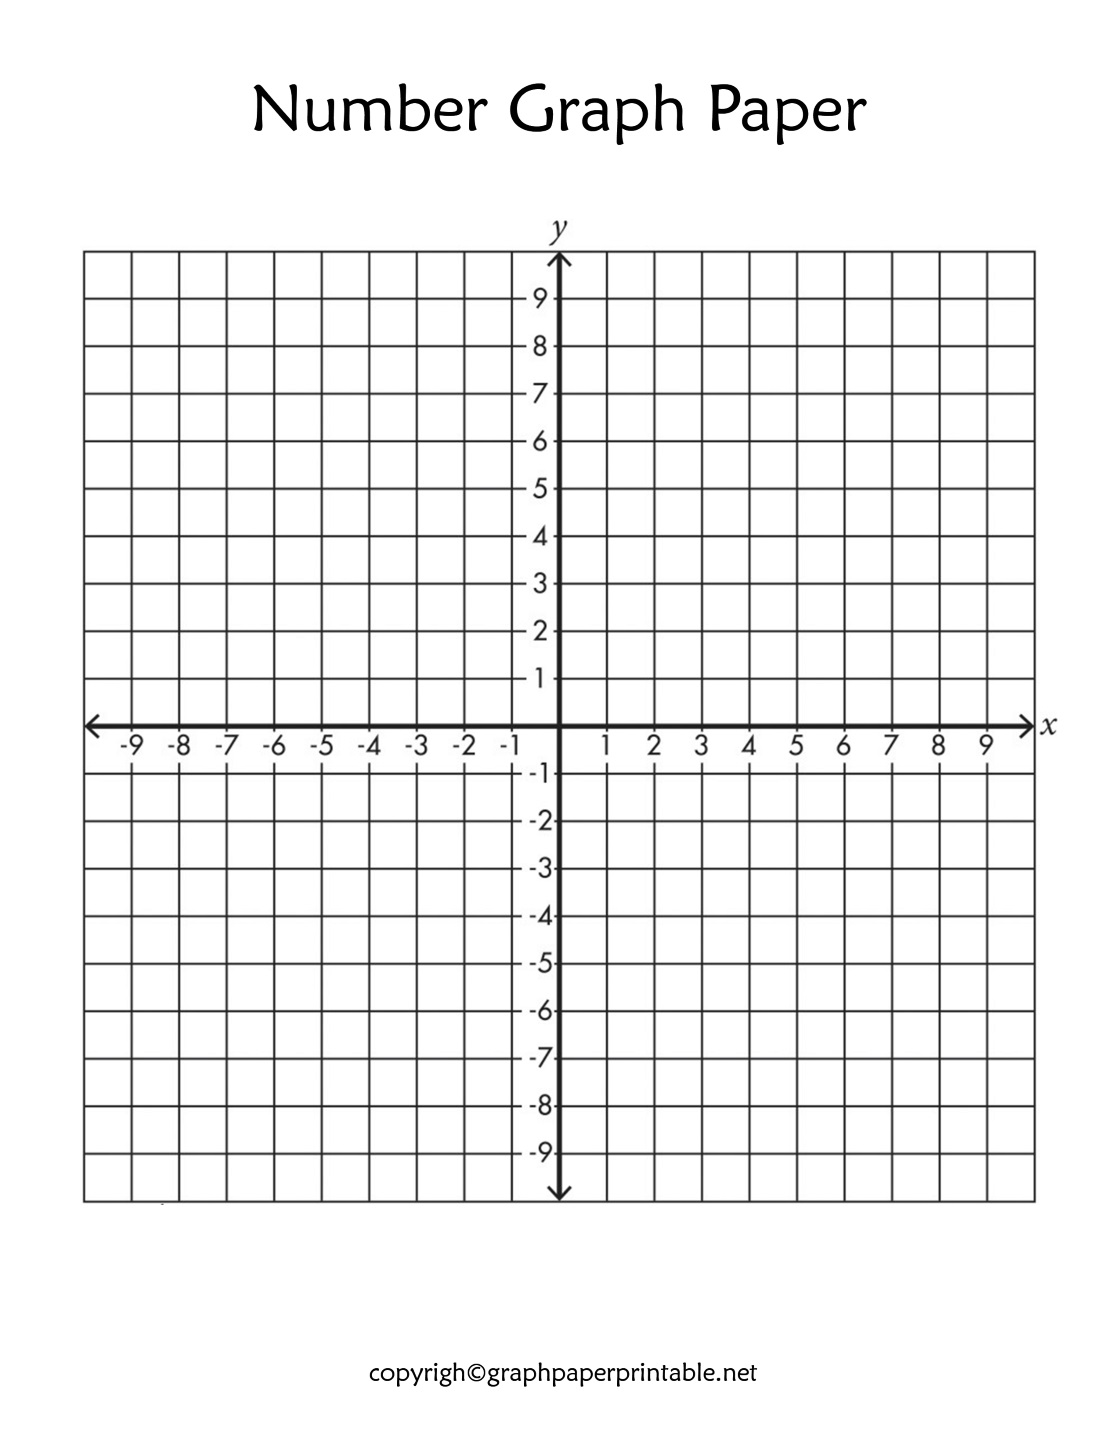 Number Graph Paper